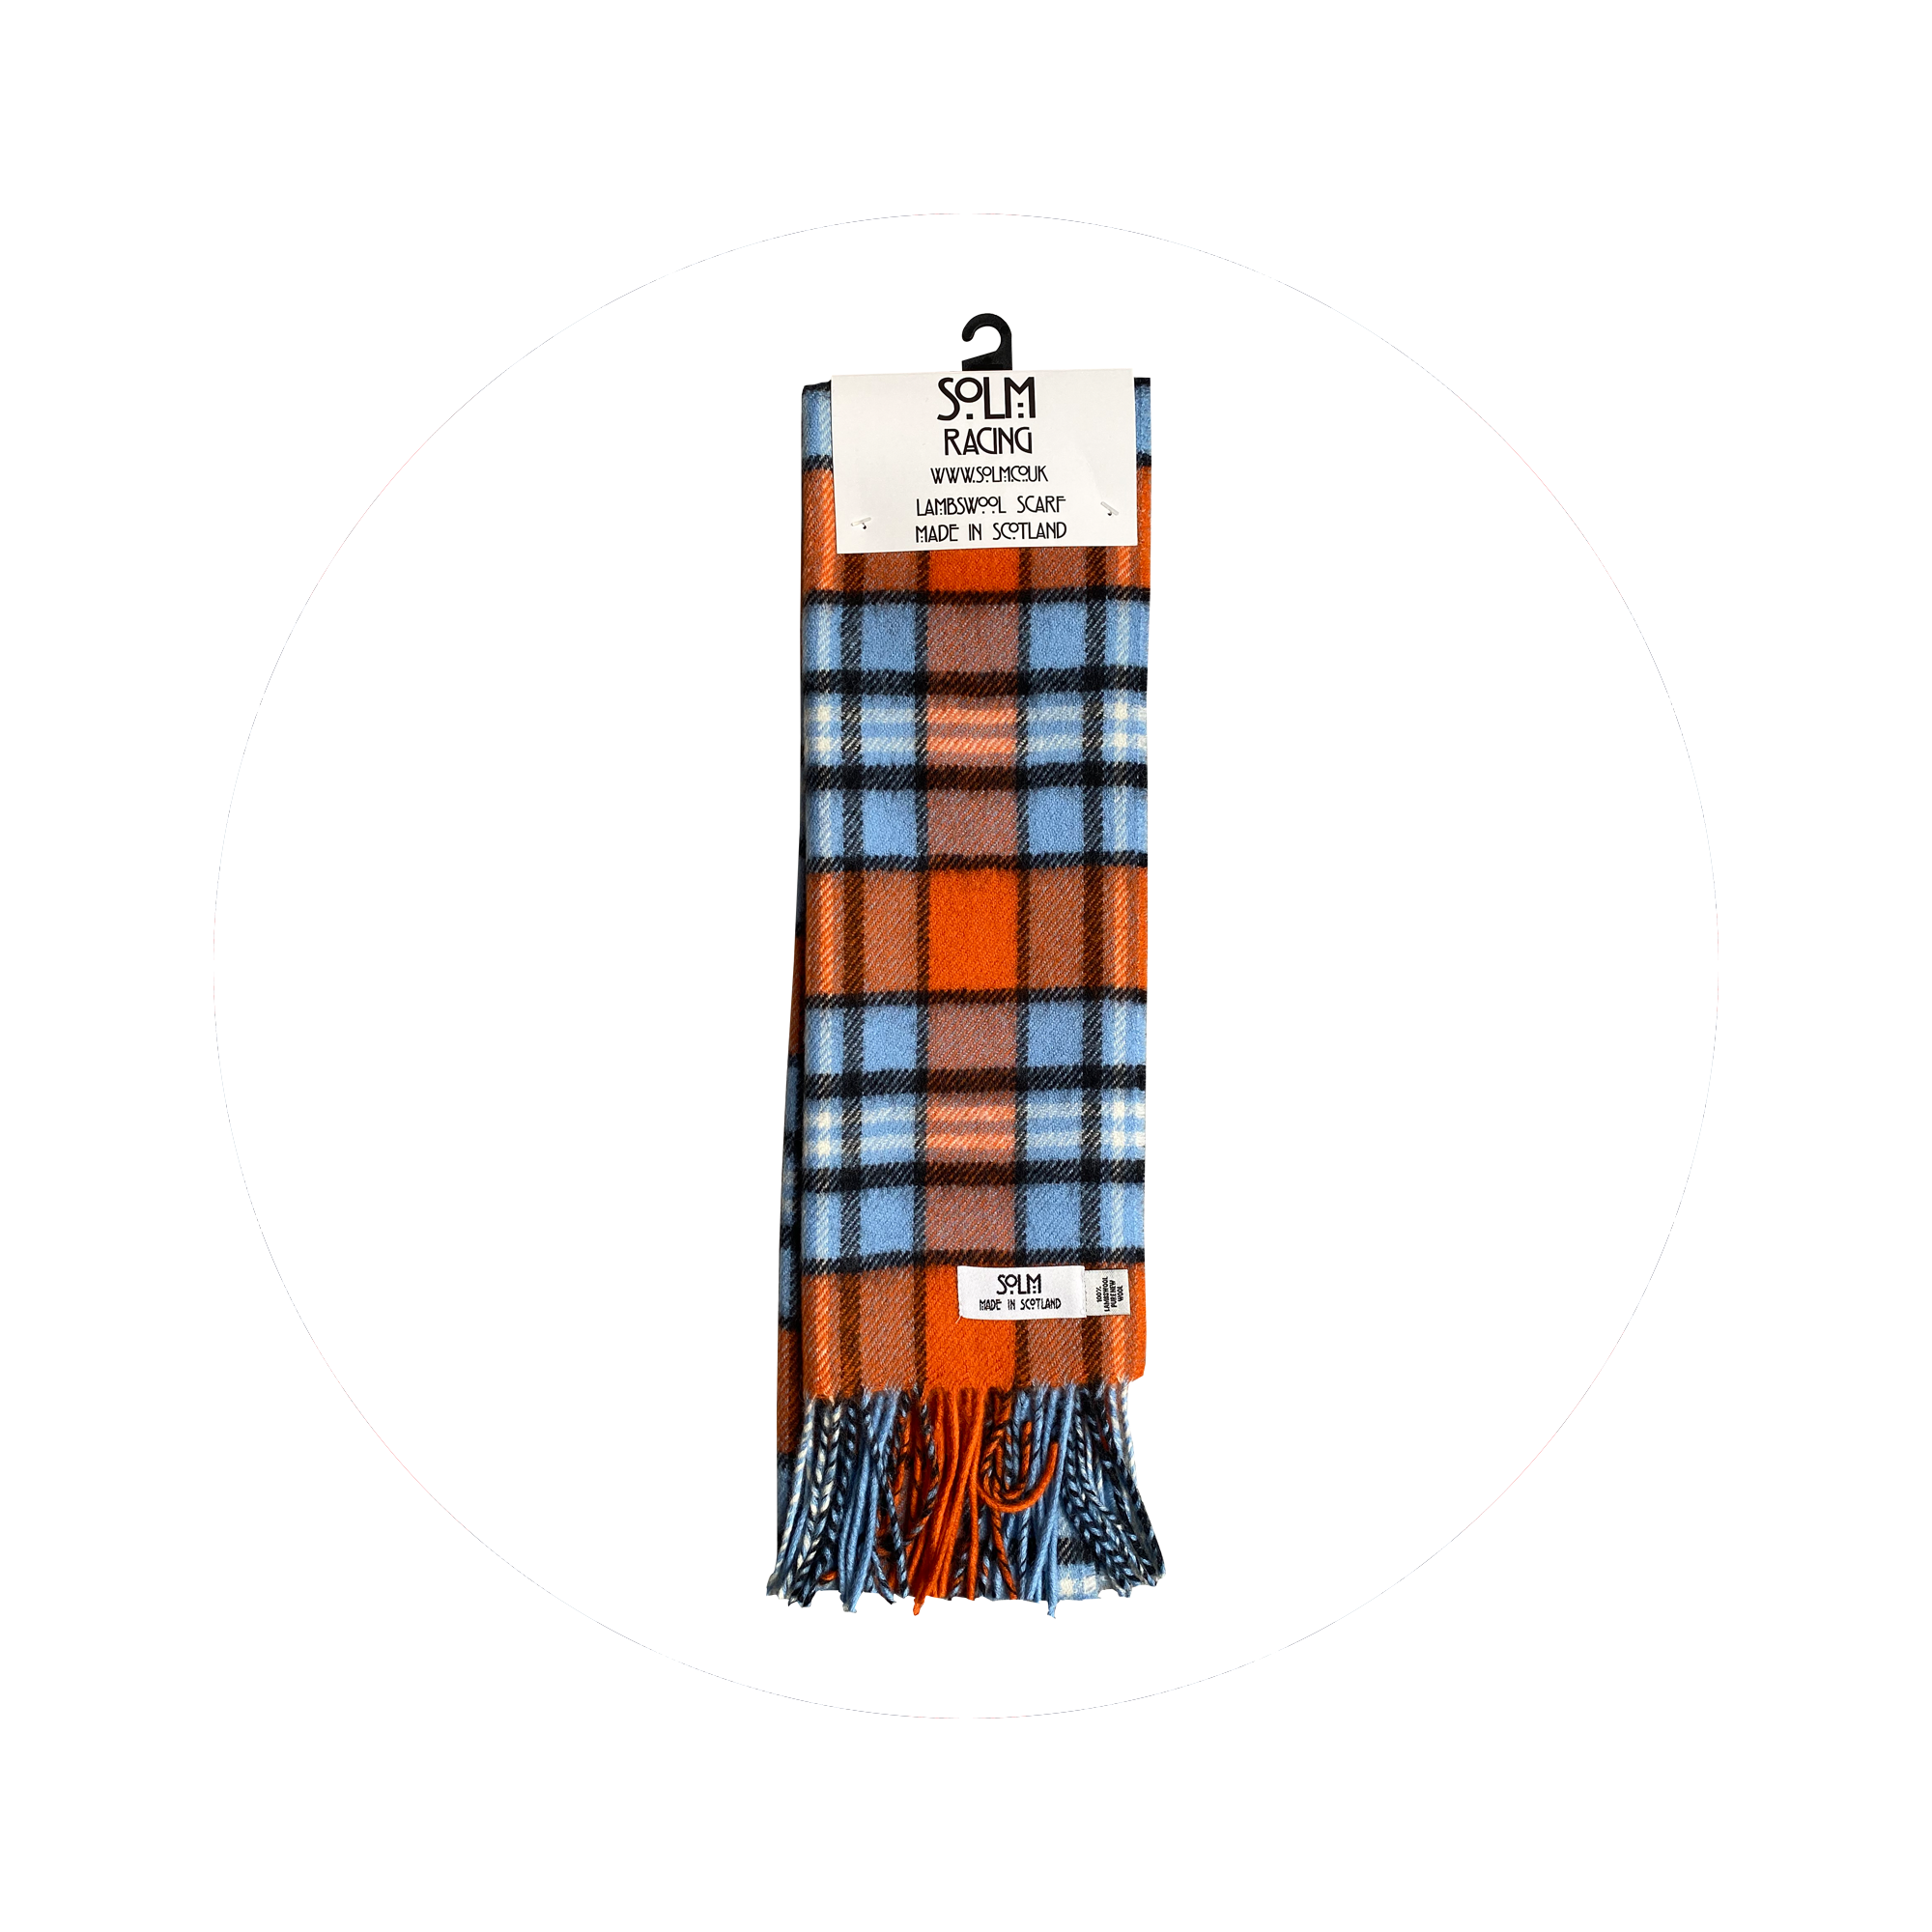 SOLM Lambswool Scarf (Racing)